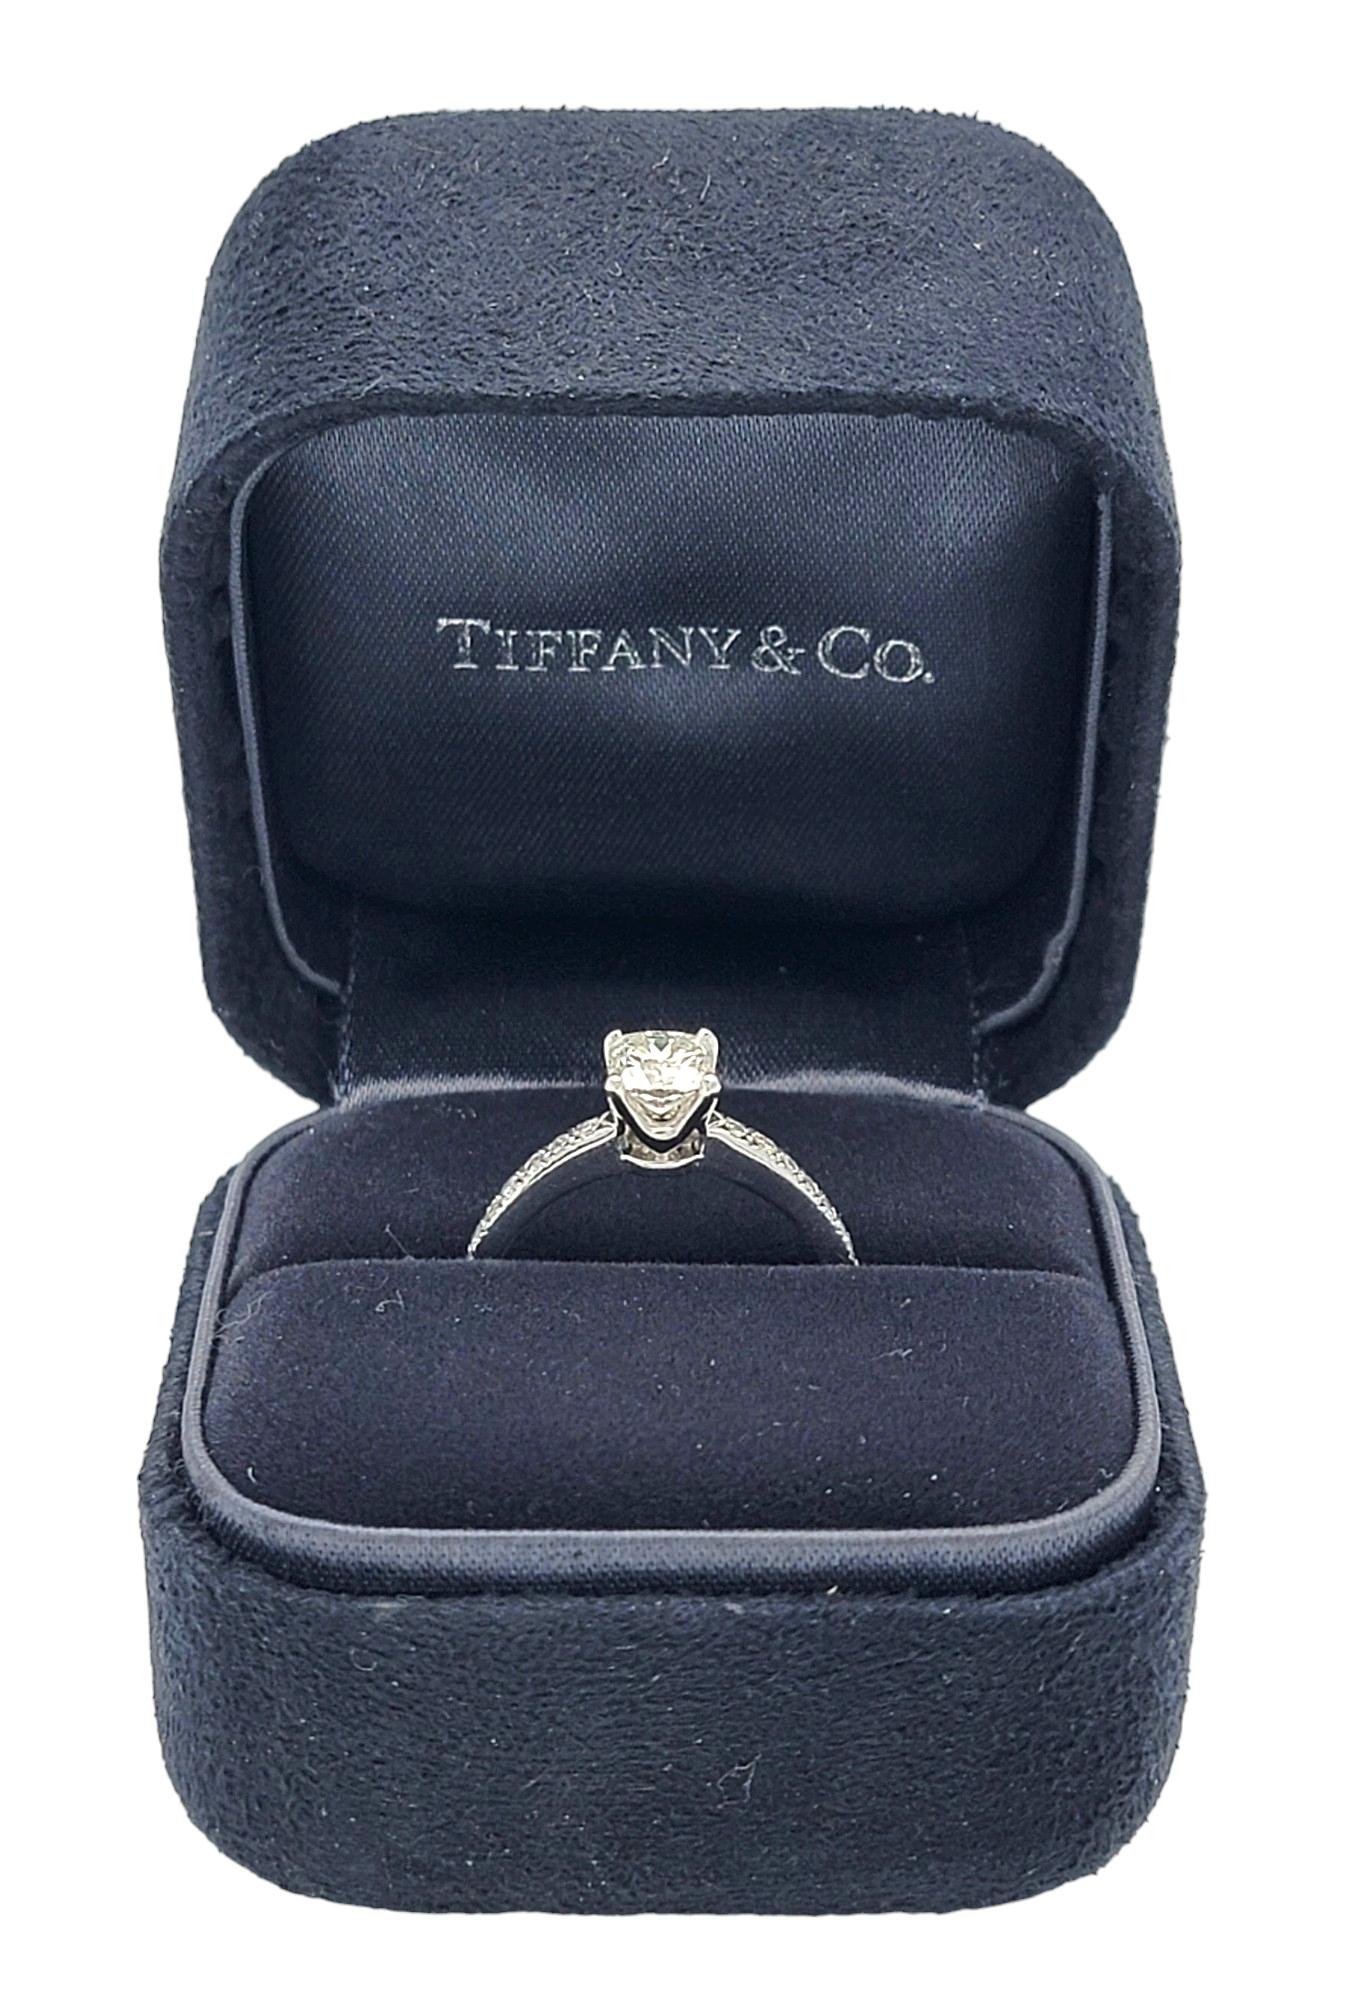 Tiffany & Co. Lucida Cut .70 Diamond Engagement Ring in Platinum with Pave Band For Sale 4